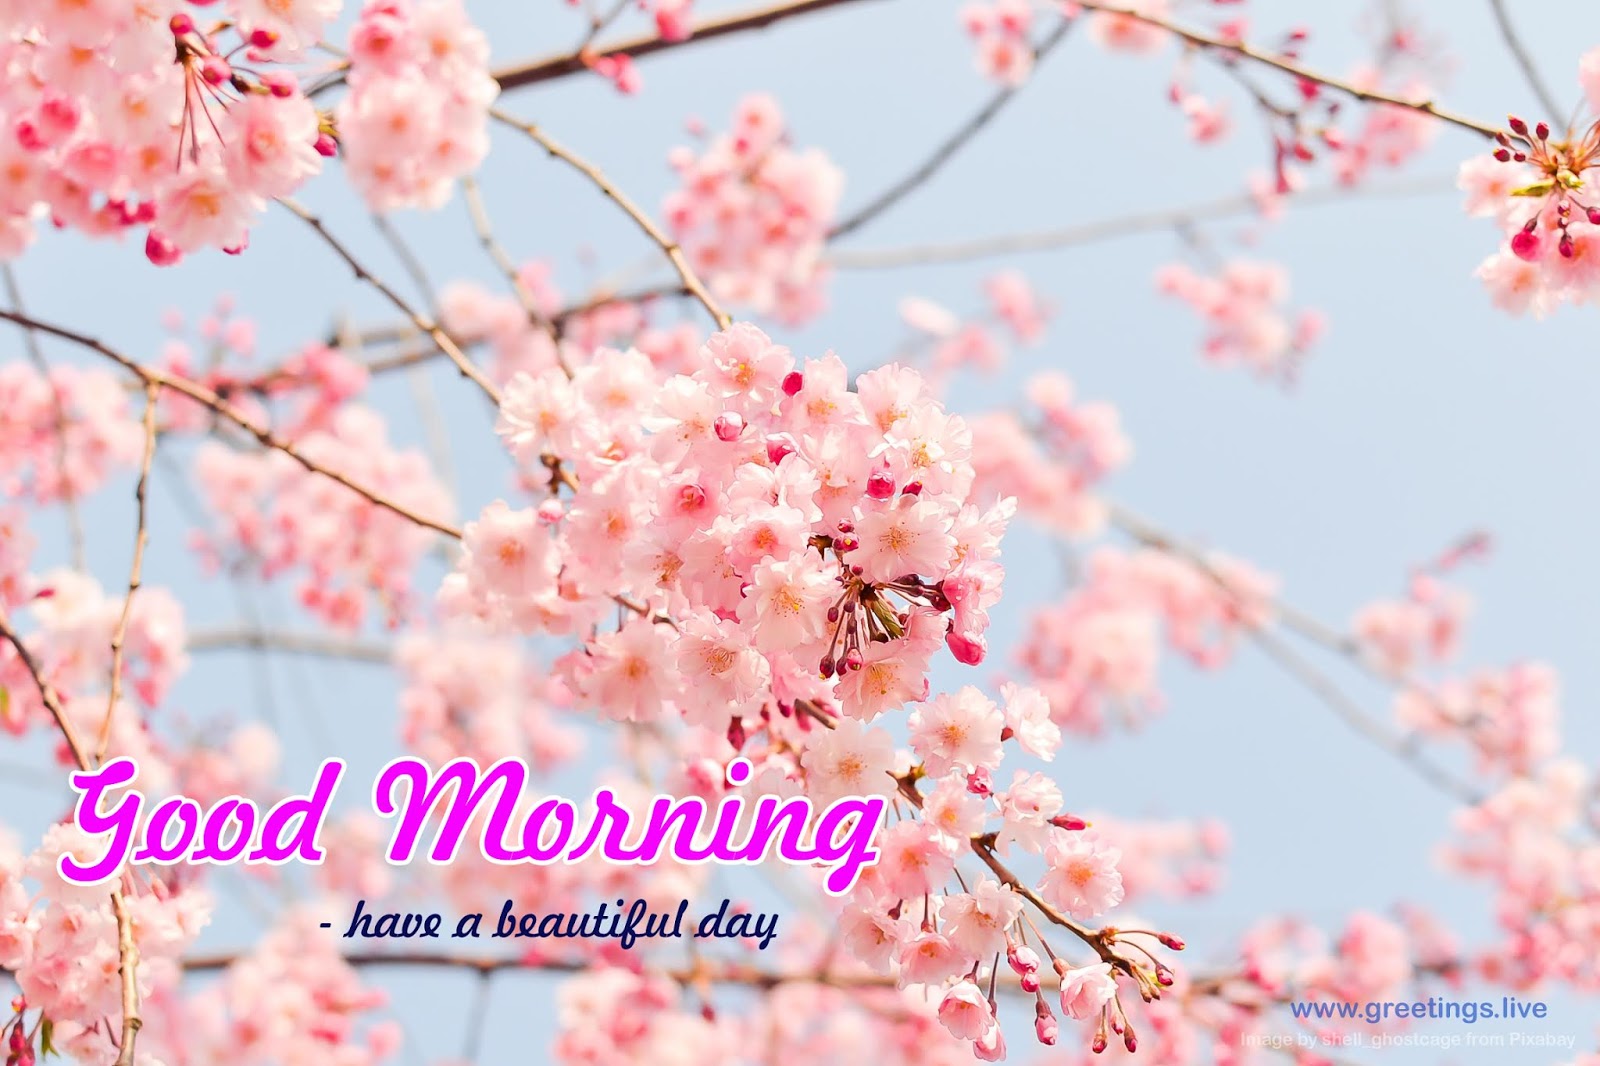 Greetings Live Free Daily Greetings Pictures Festival Gif Images Morning Greetings With Cherry